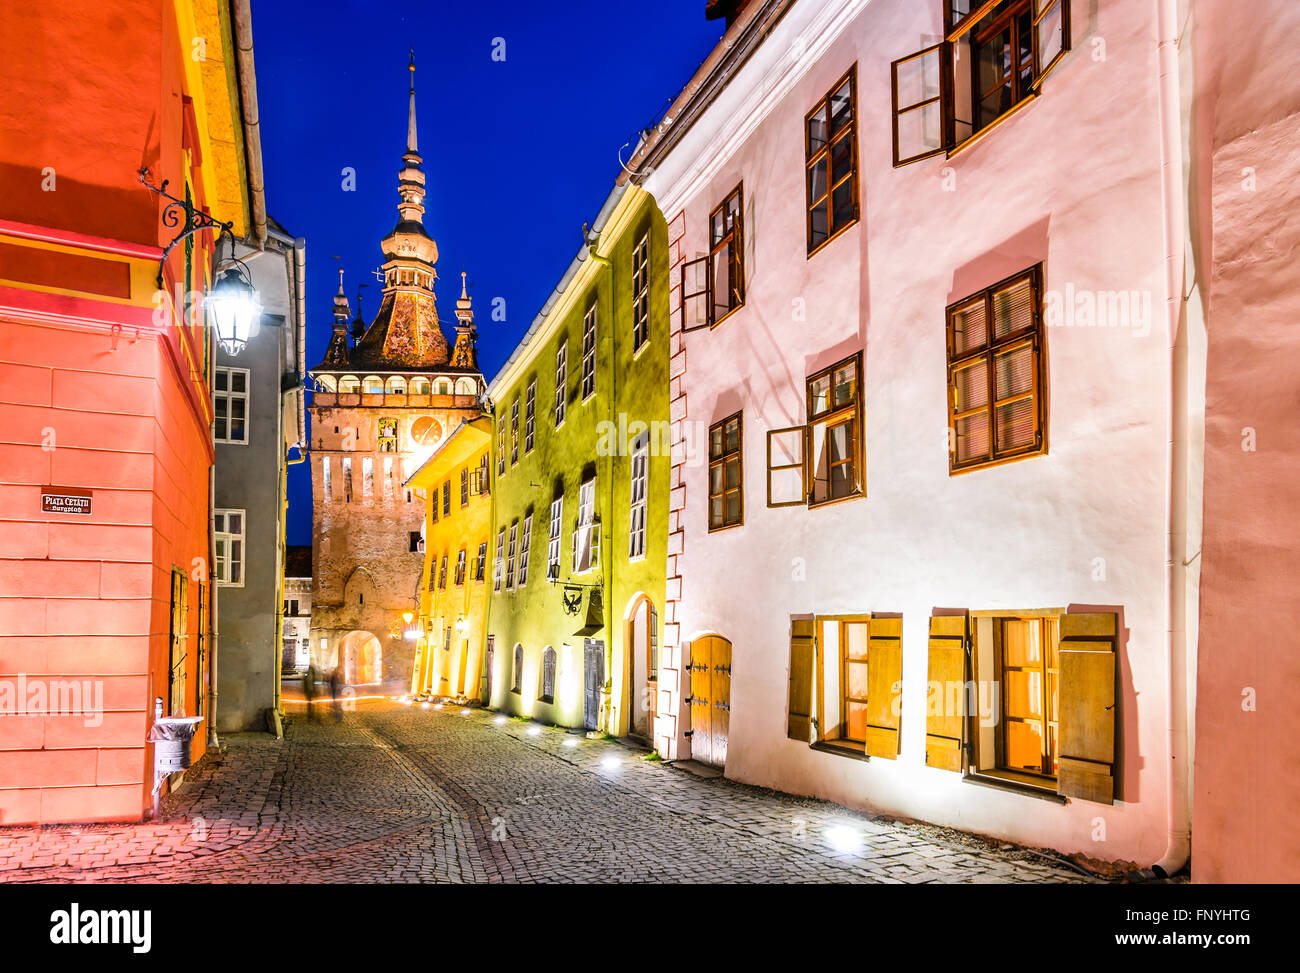 Sighisoara in Romania. Night view of clock tower in historic medieval city. Vlad Tepes, Dracula, was born here. Stock Photo